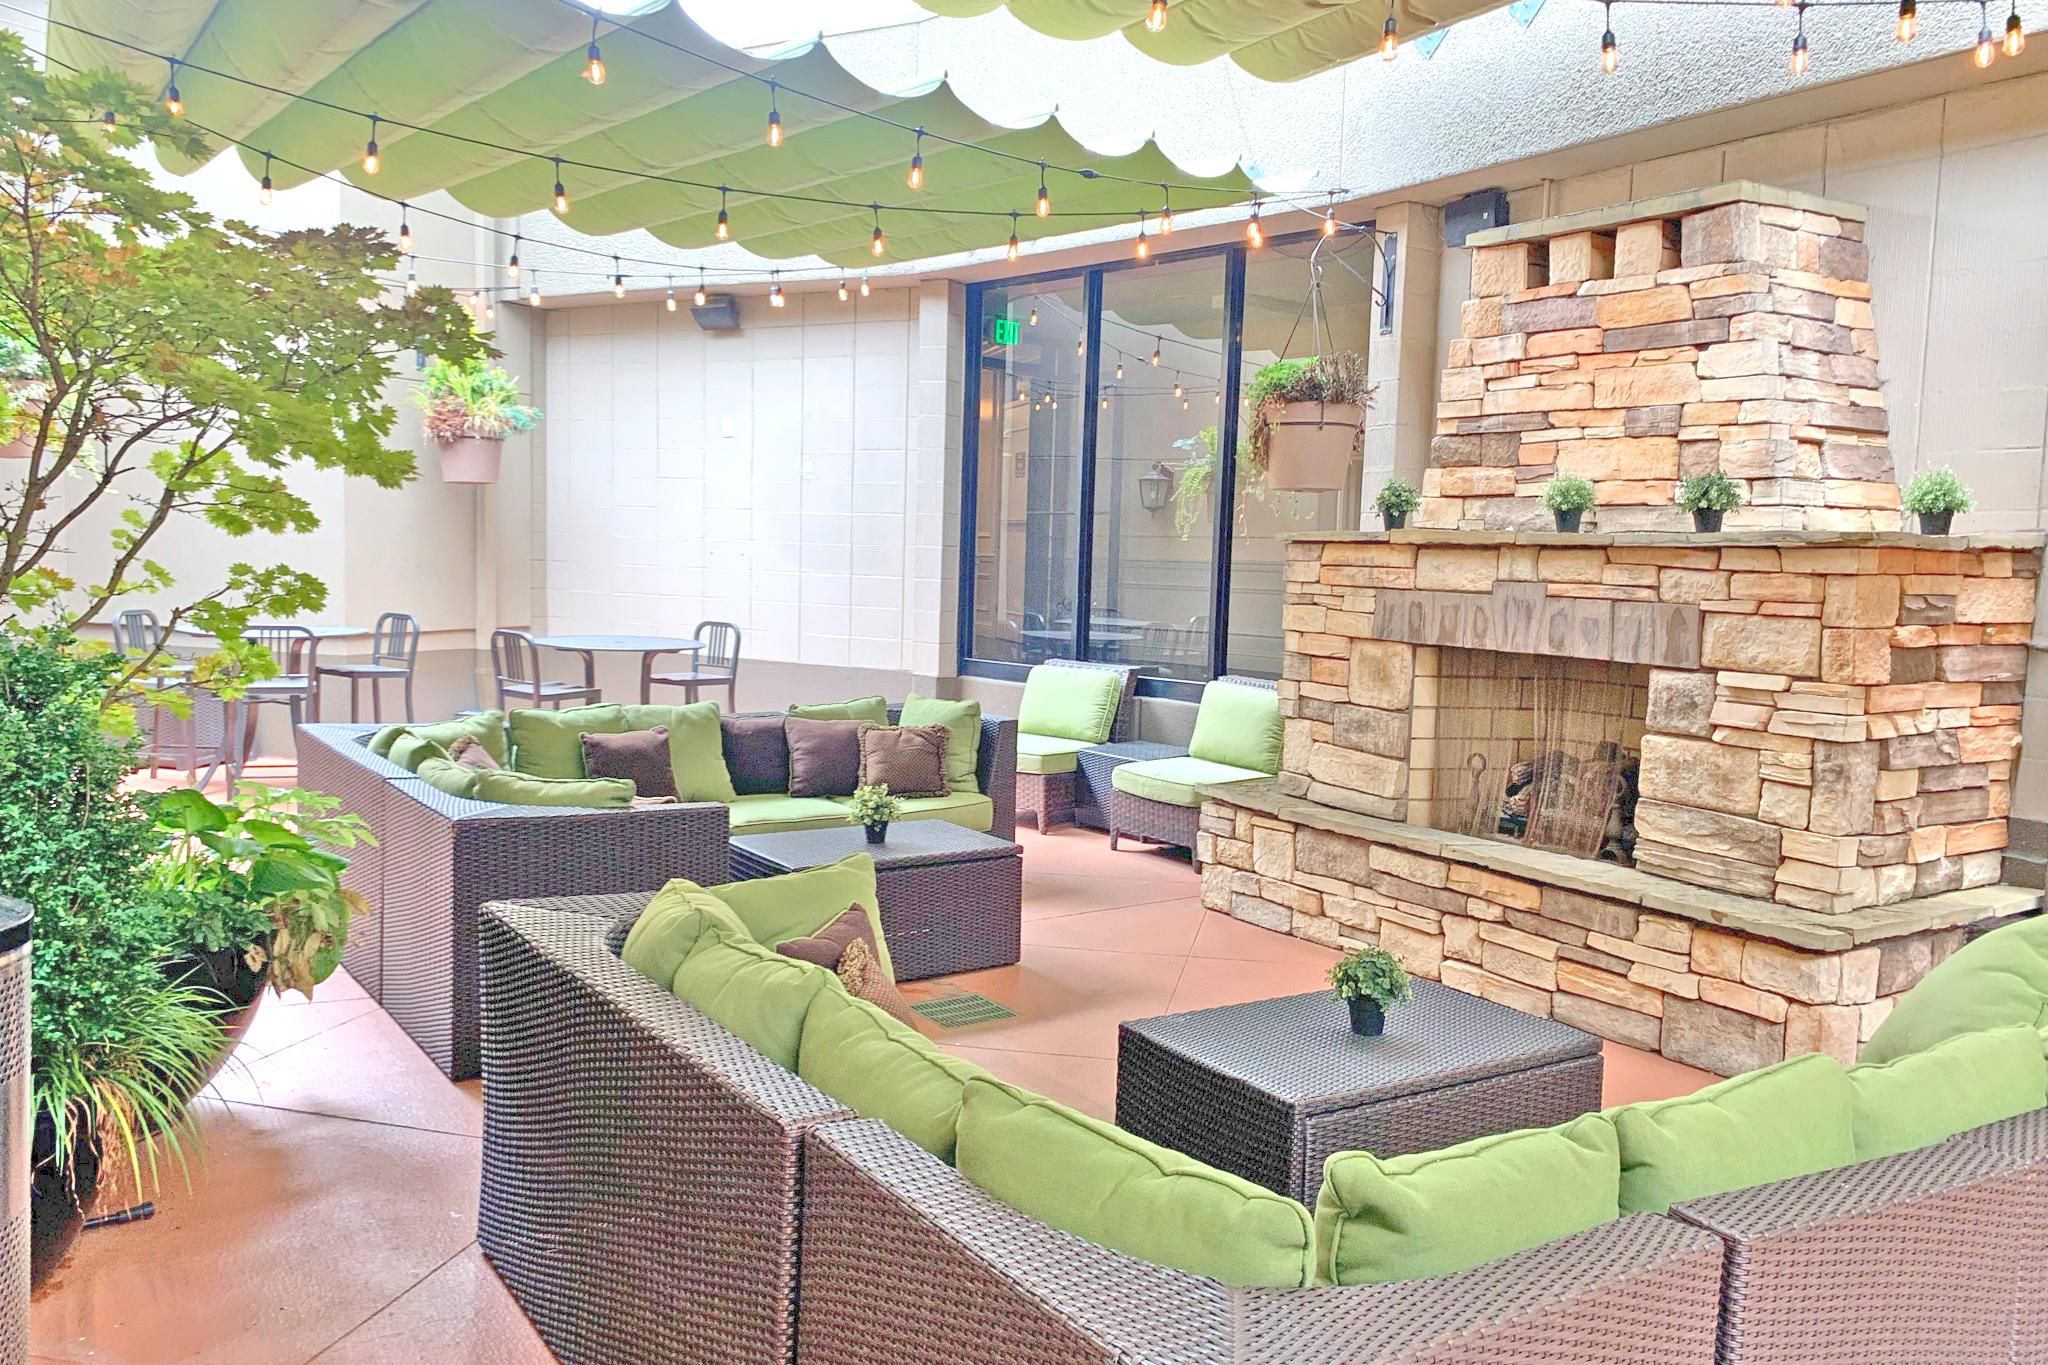 Relax on our Fireside Plaza, the perfect place to meet and unwind.